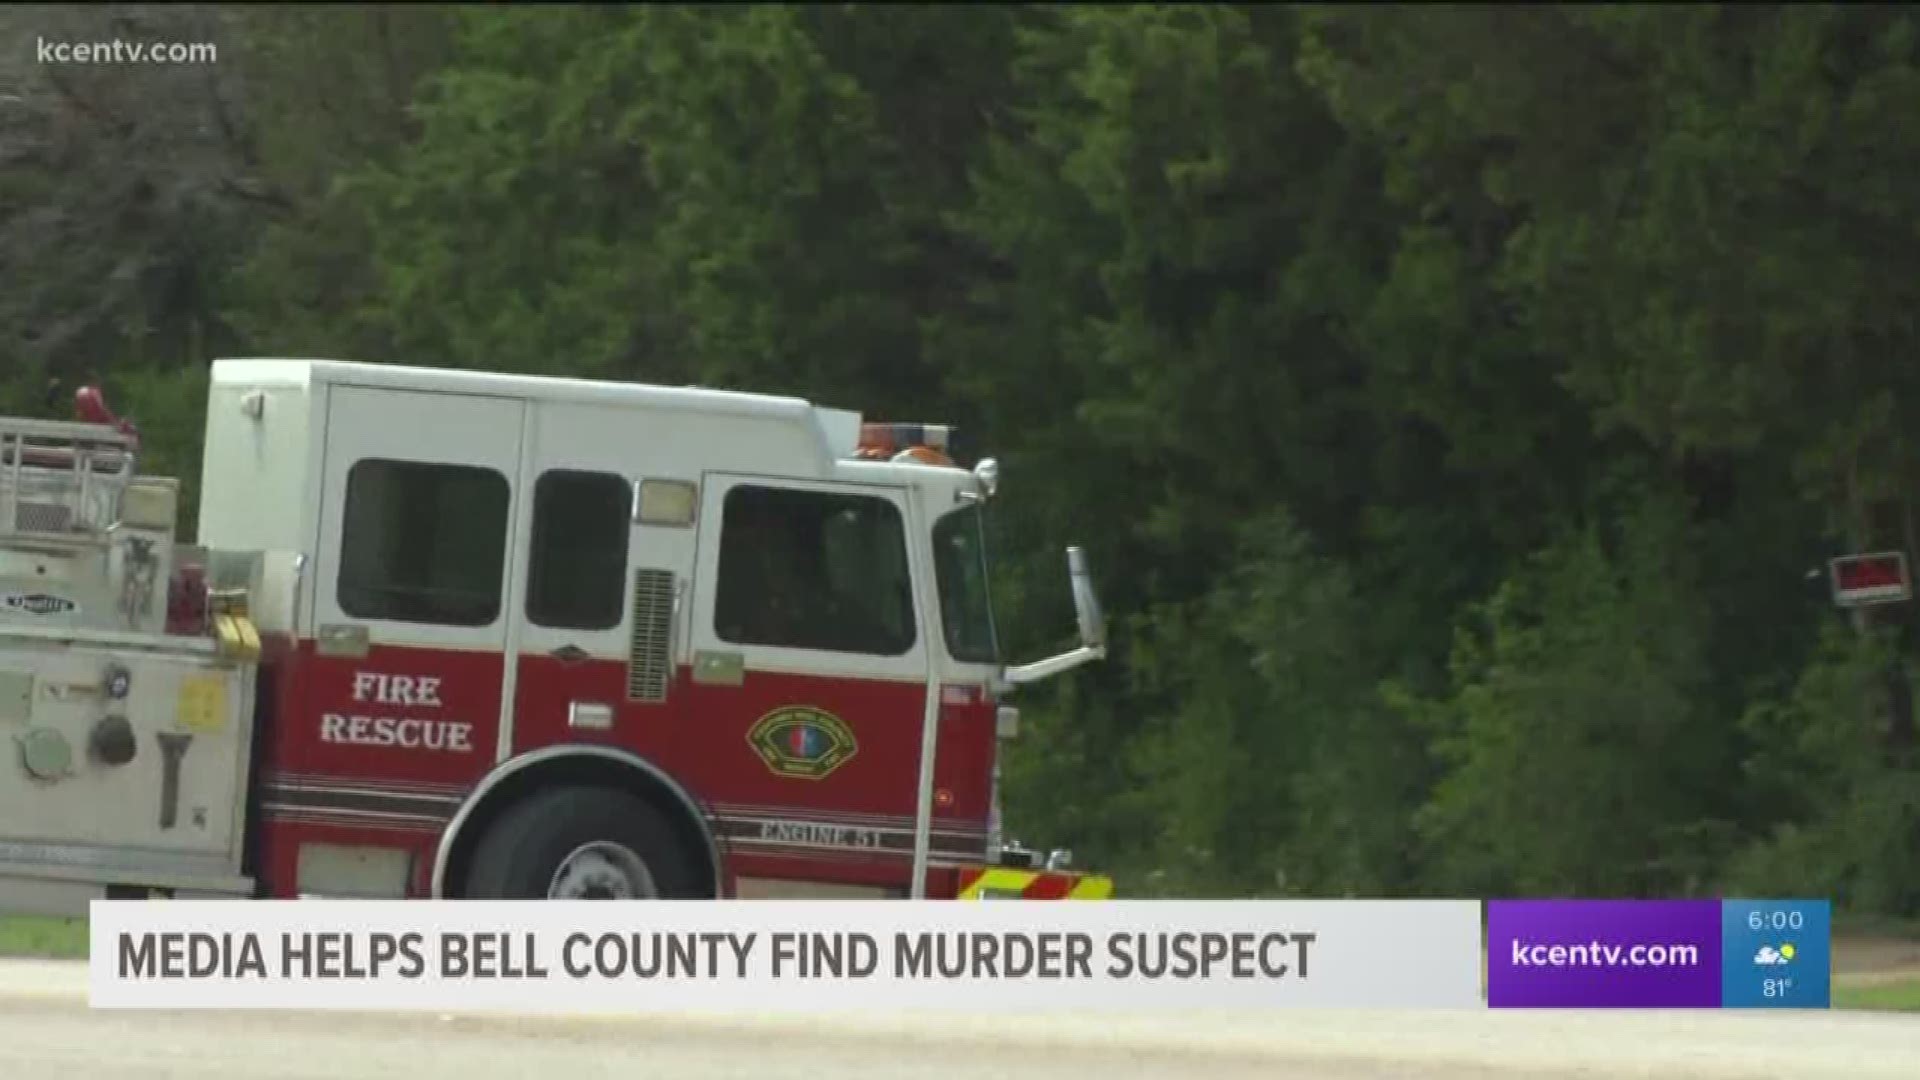 The Bell County Sheriff's office now has two suspects in custody after finding a dead body with a gunshot wound to the head in a burn pile. 